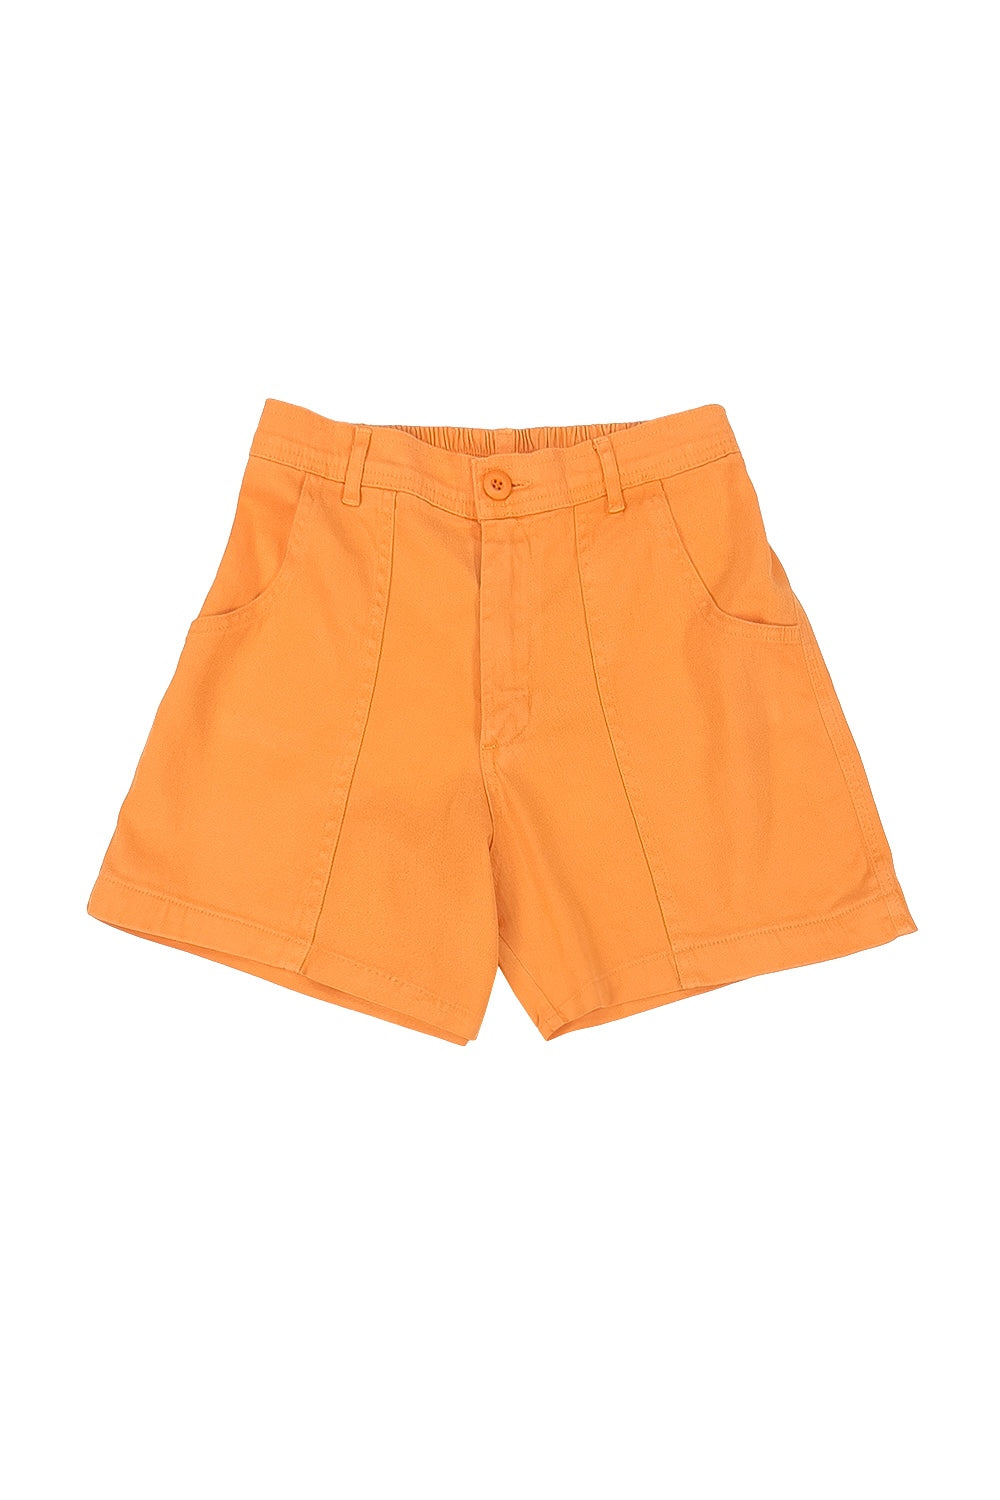 OEM Supply Multicolor 100% Cotton Men Short Pants, Mens Shorts for Business  - China Pants and Mans' Pants price